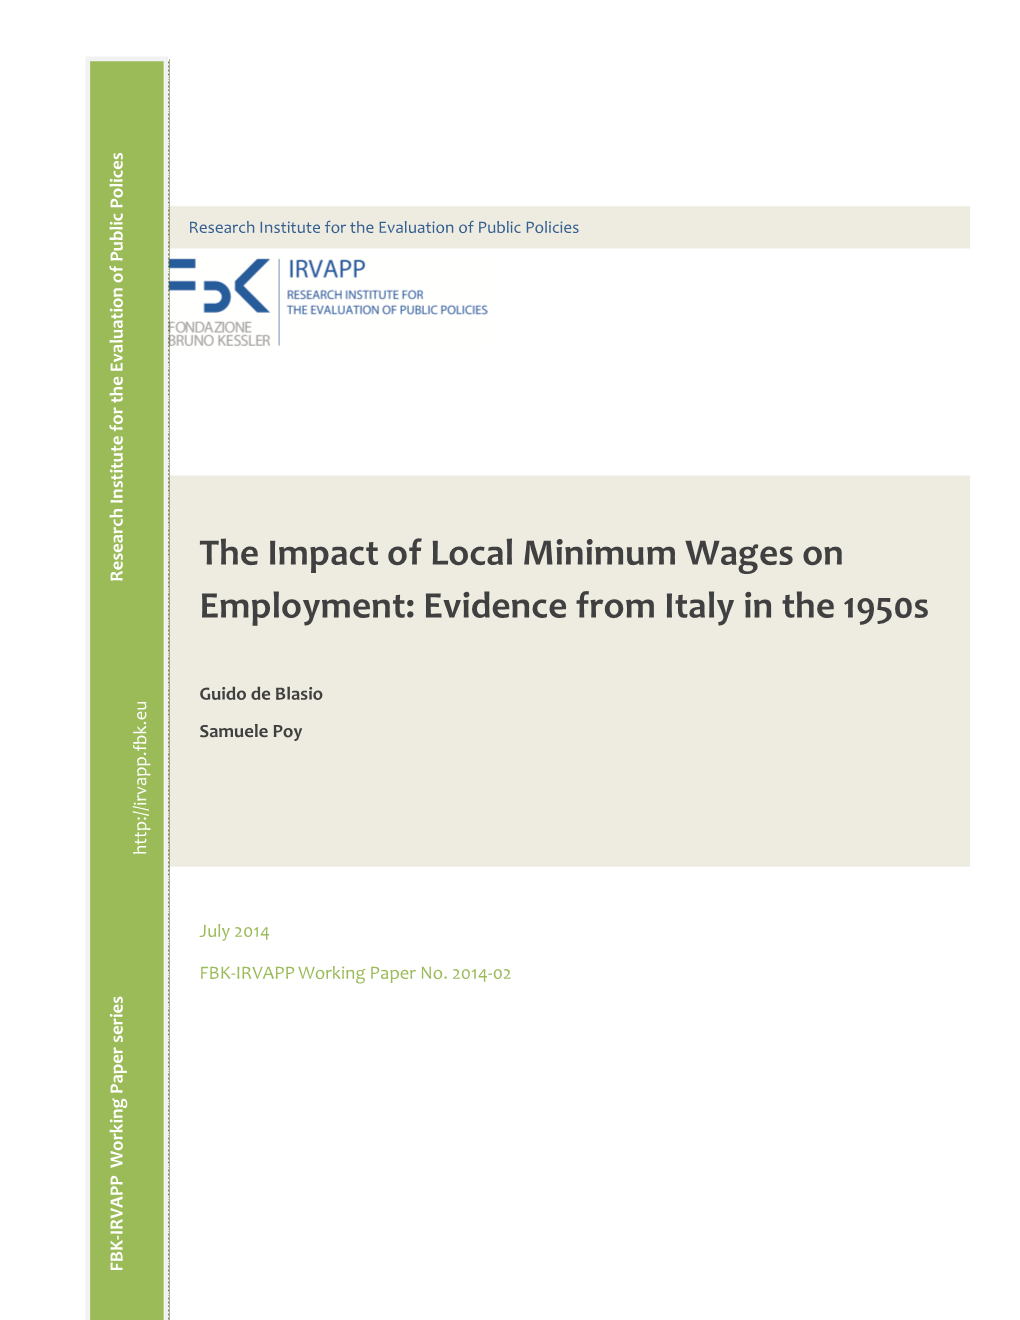 The Impact of Local Minimum Wages on Employment: Evidence from Italy in the 1950S